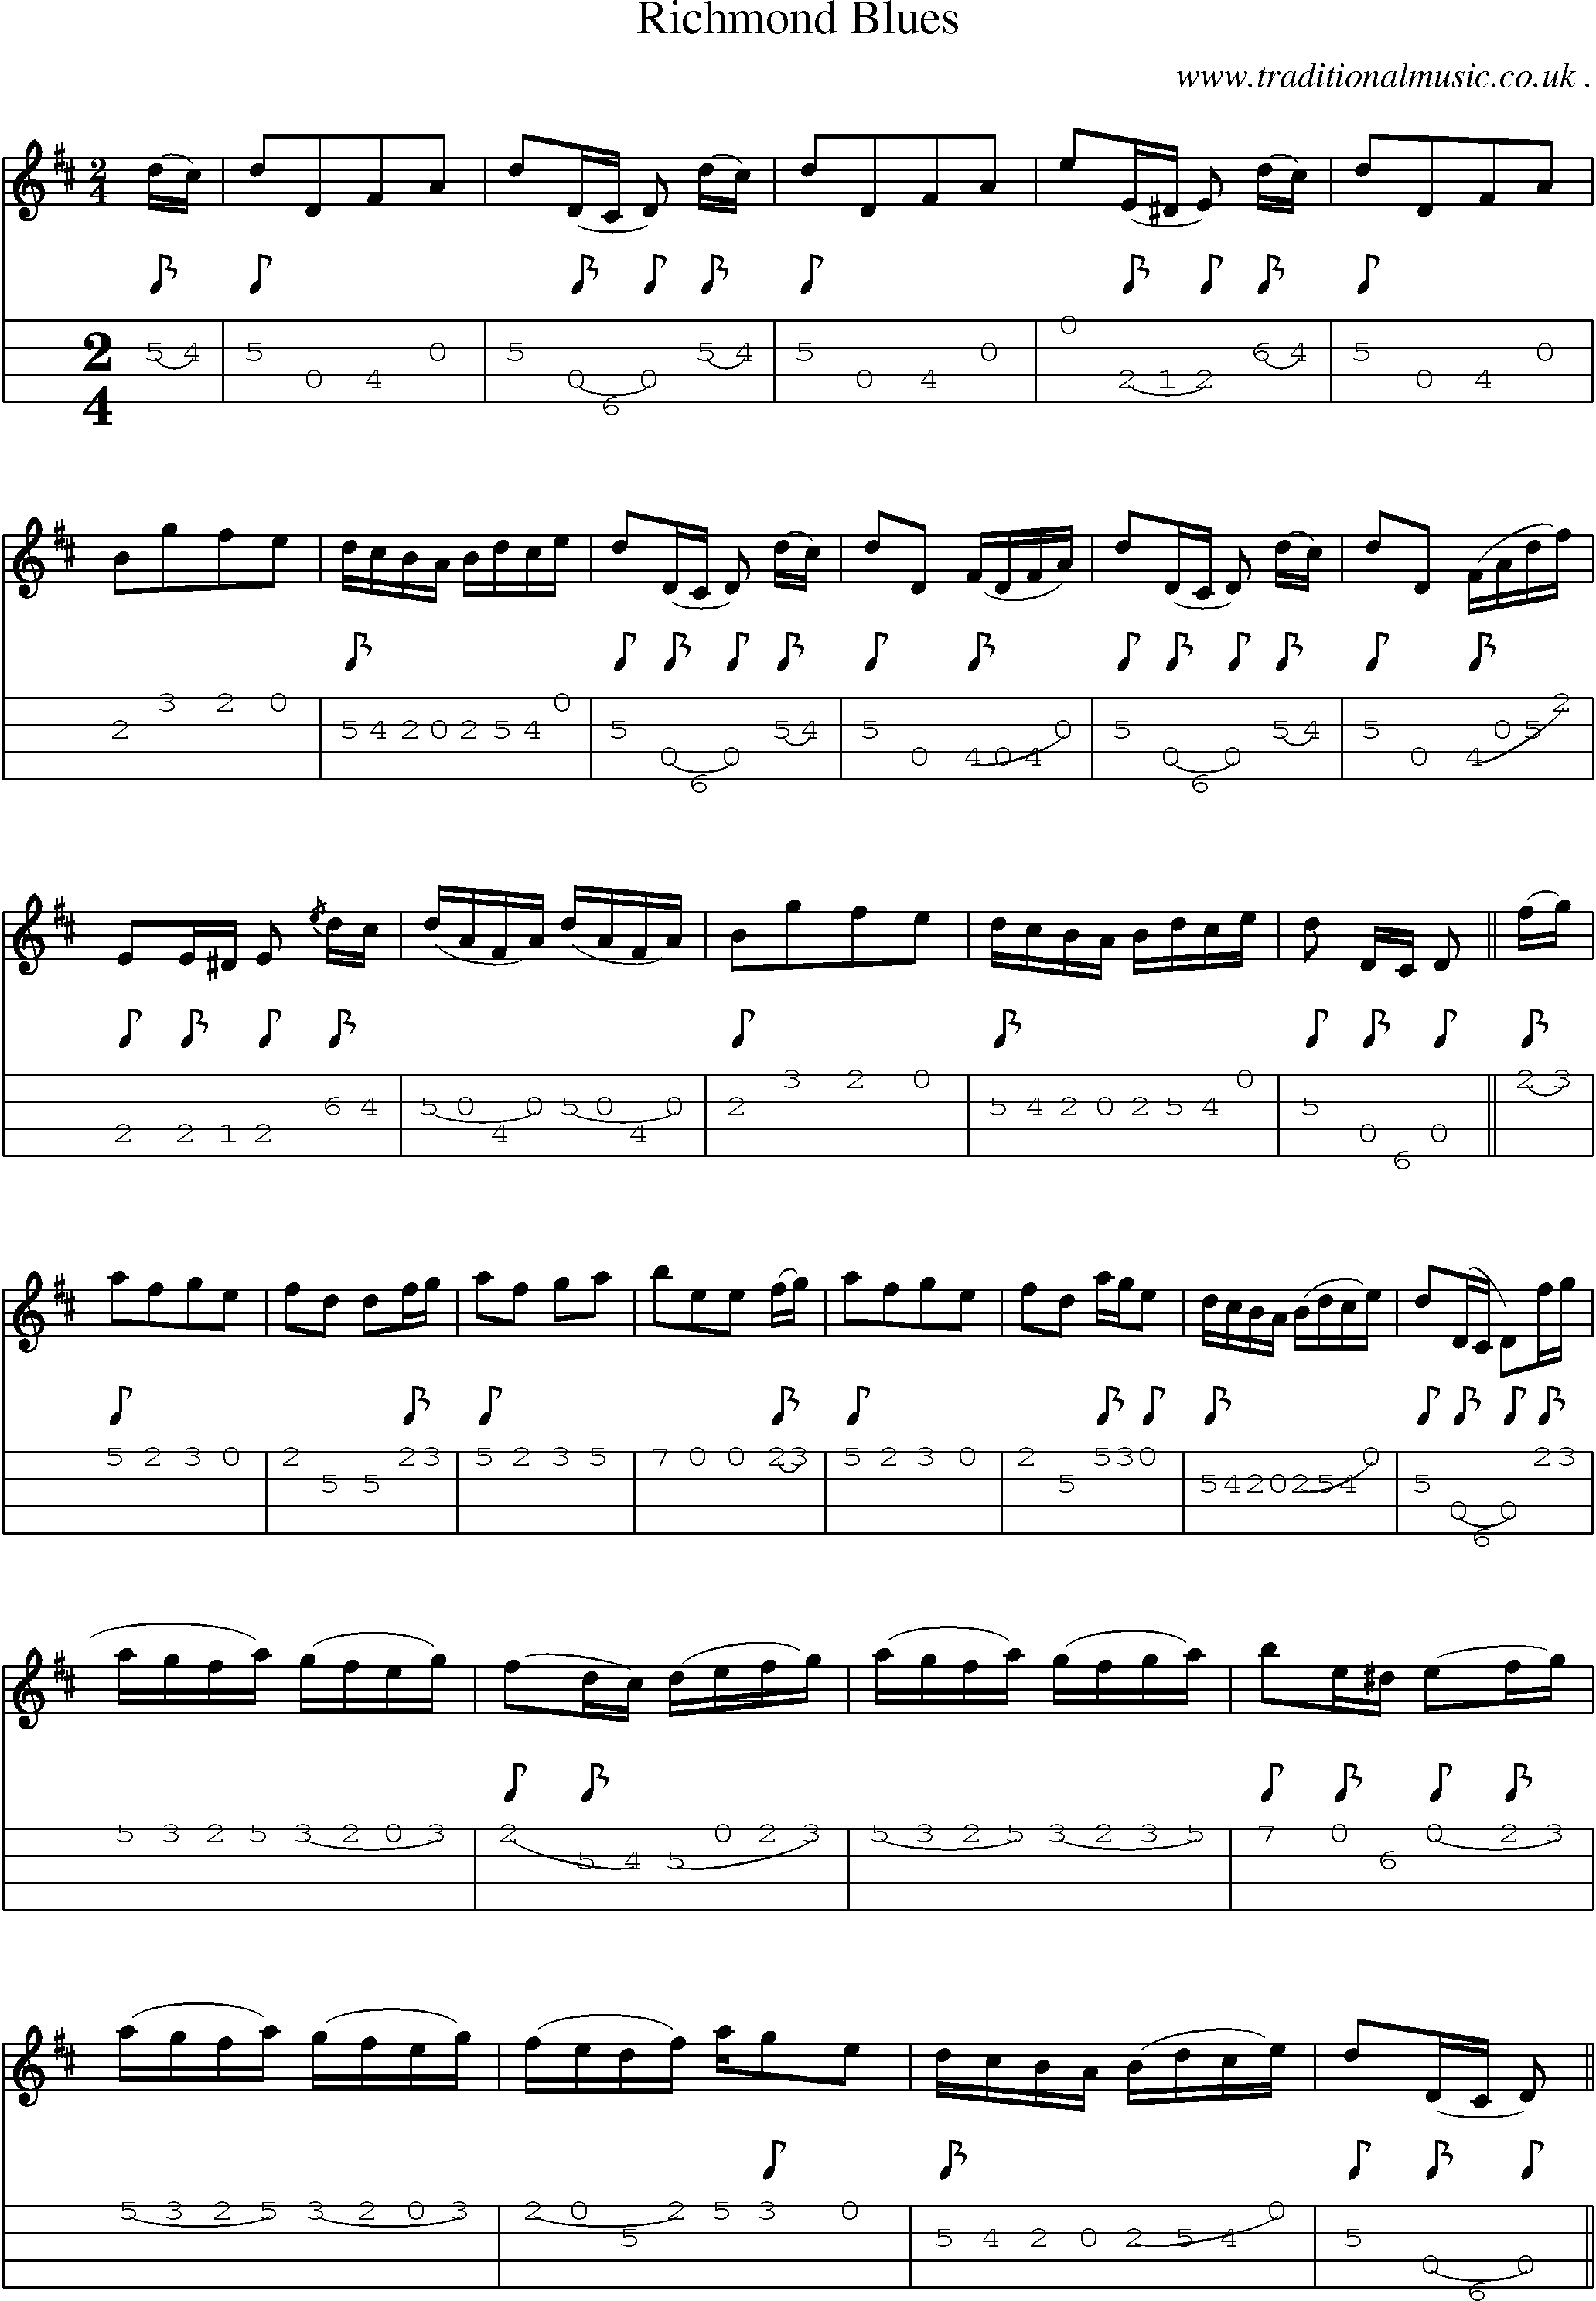 Music Score and Mandolin Tabs for Richmond Blues